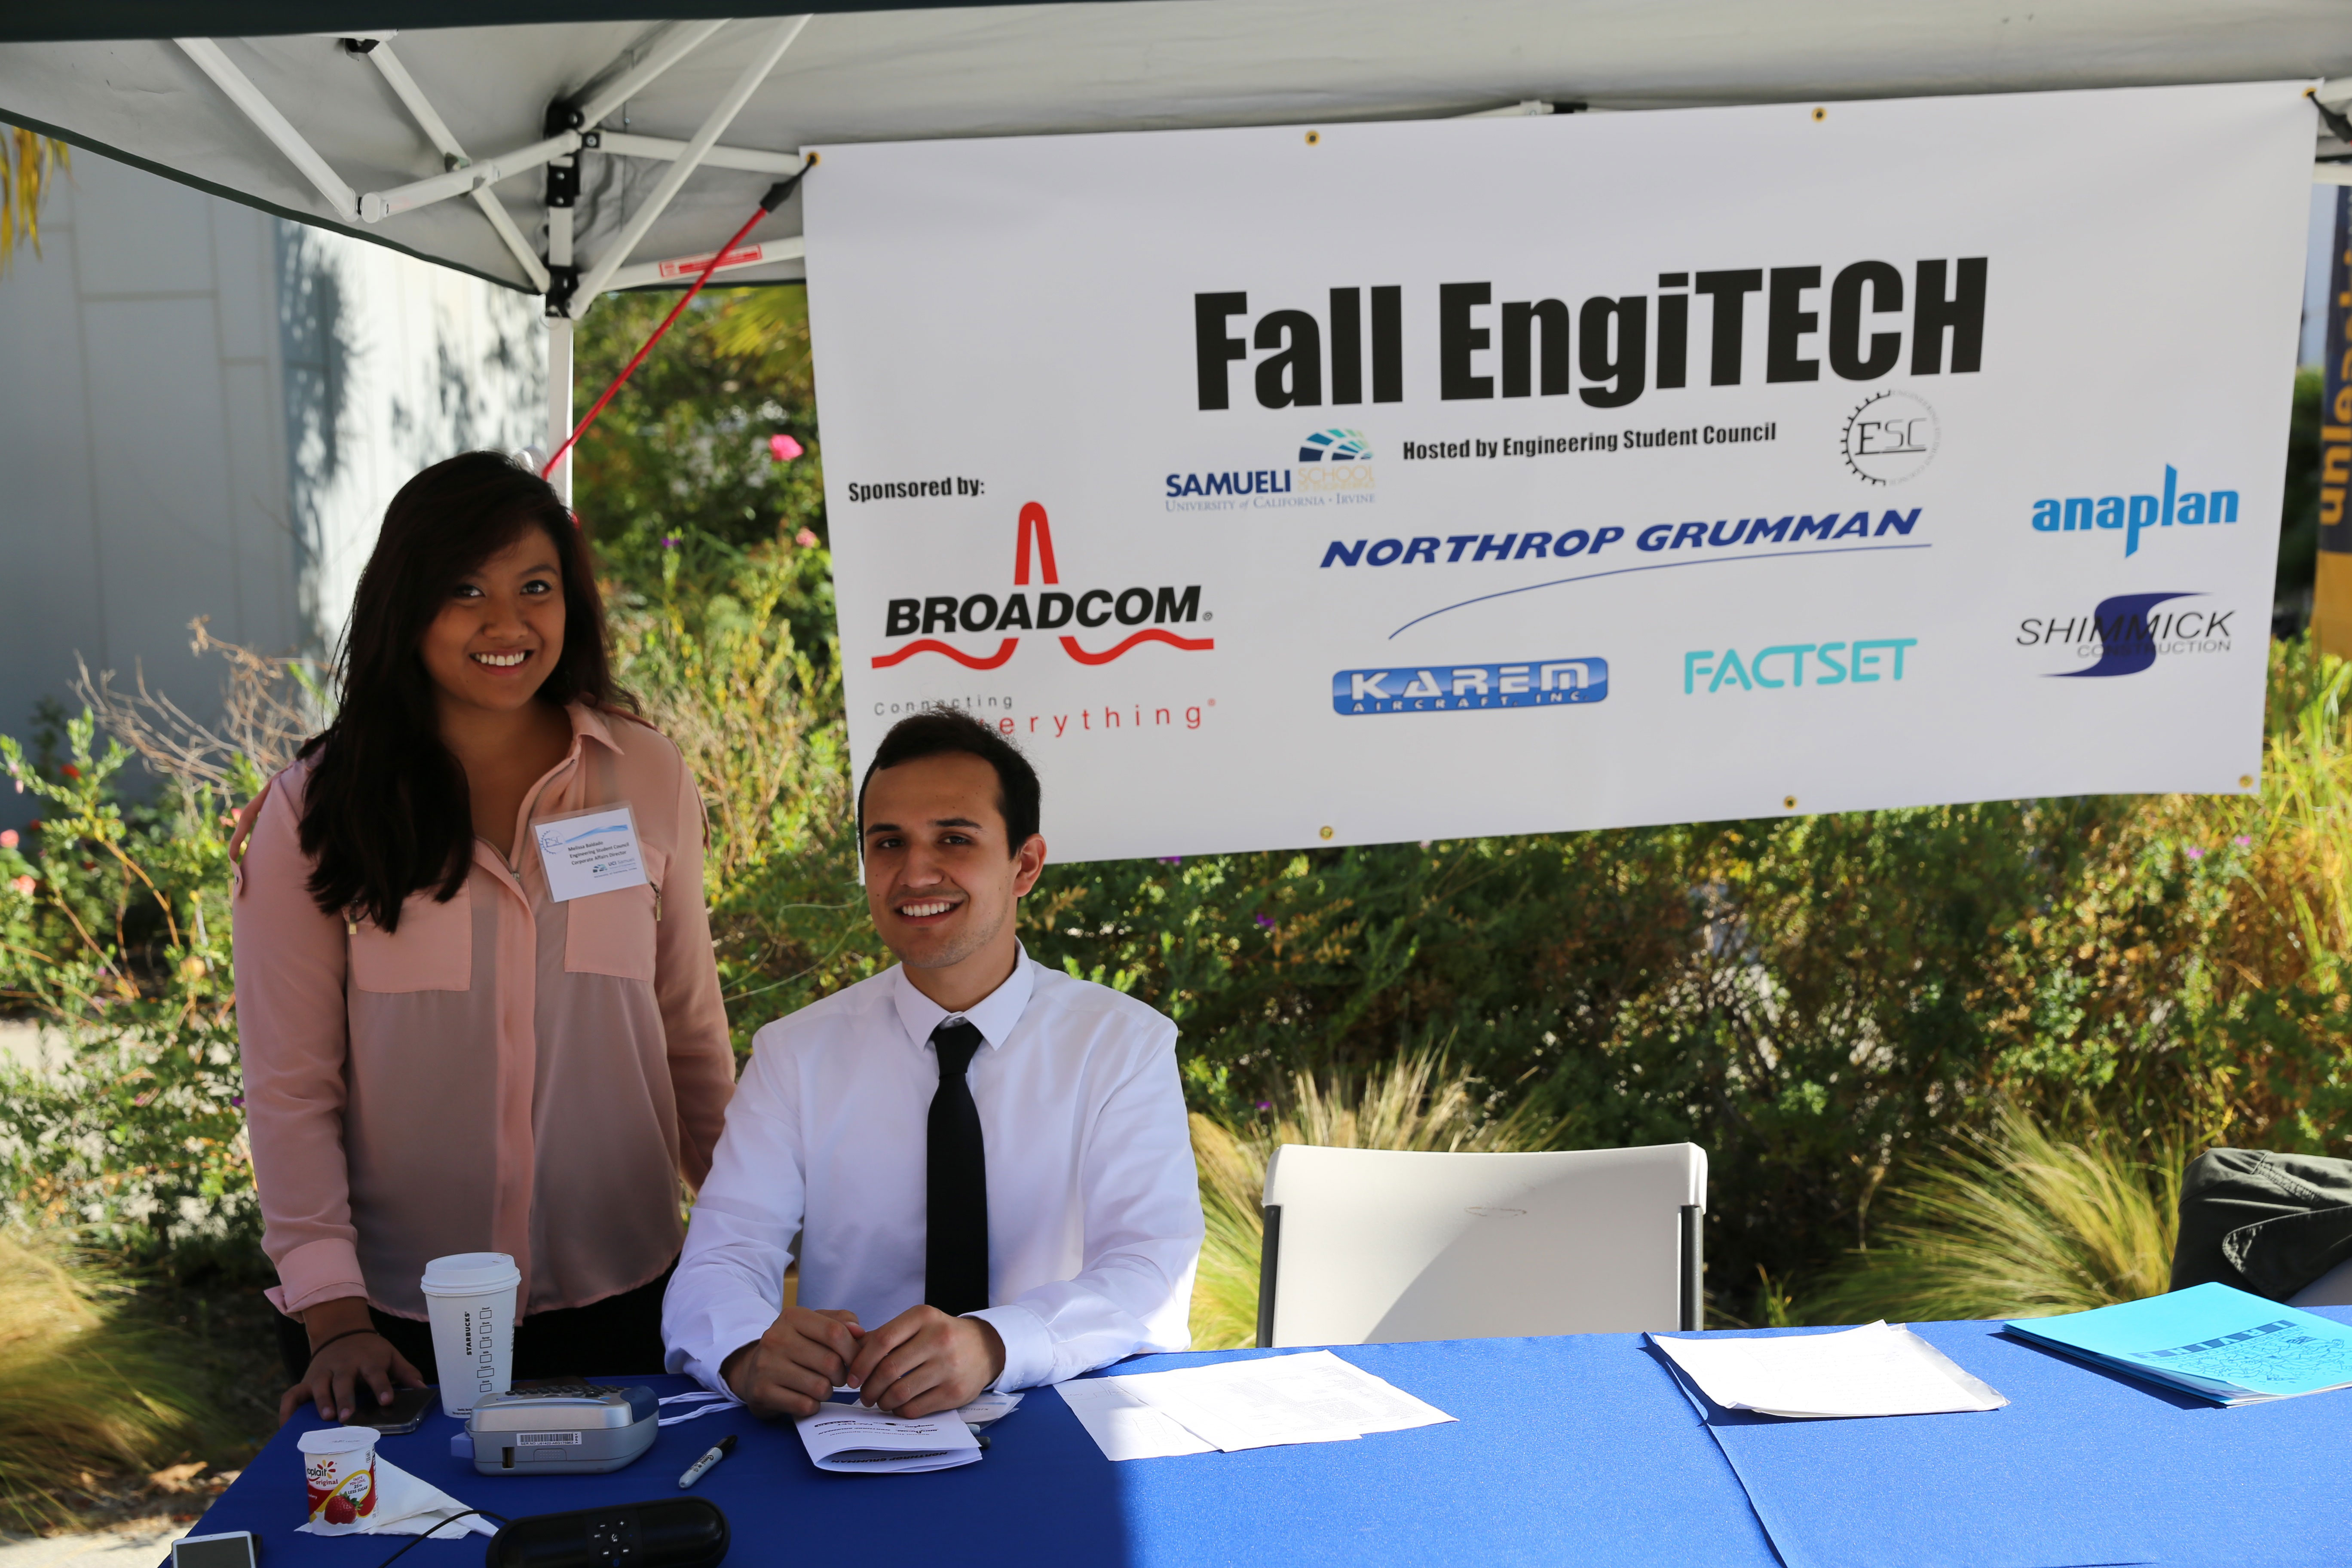 The EngiTECH career fair helps connect students to industry for internship and job opportunities